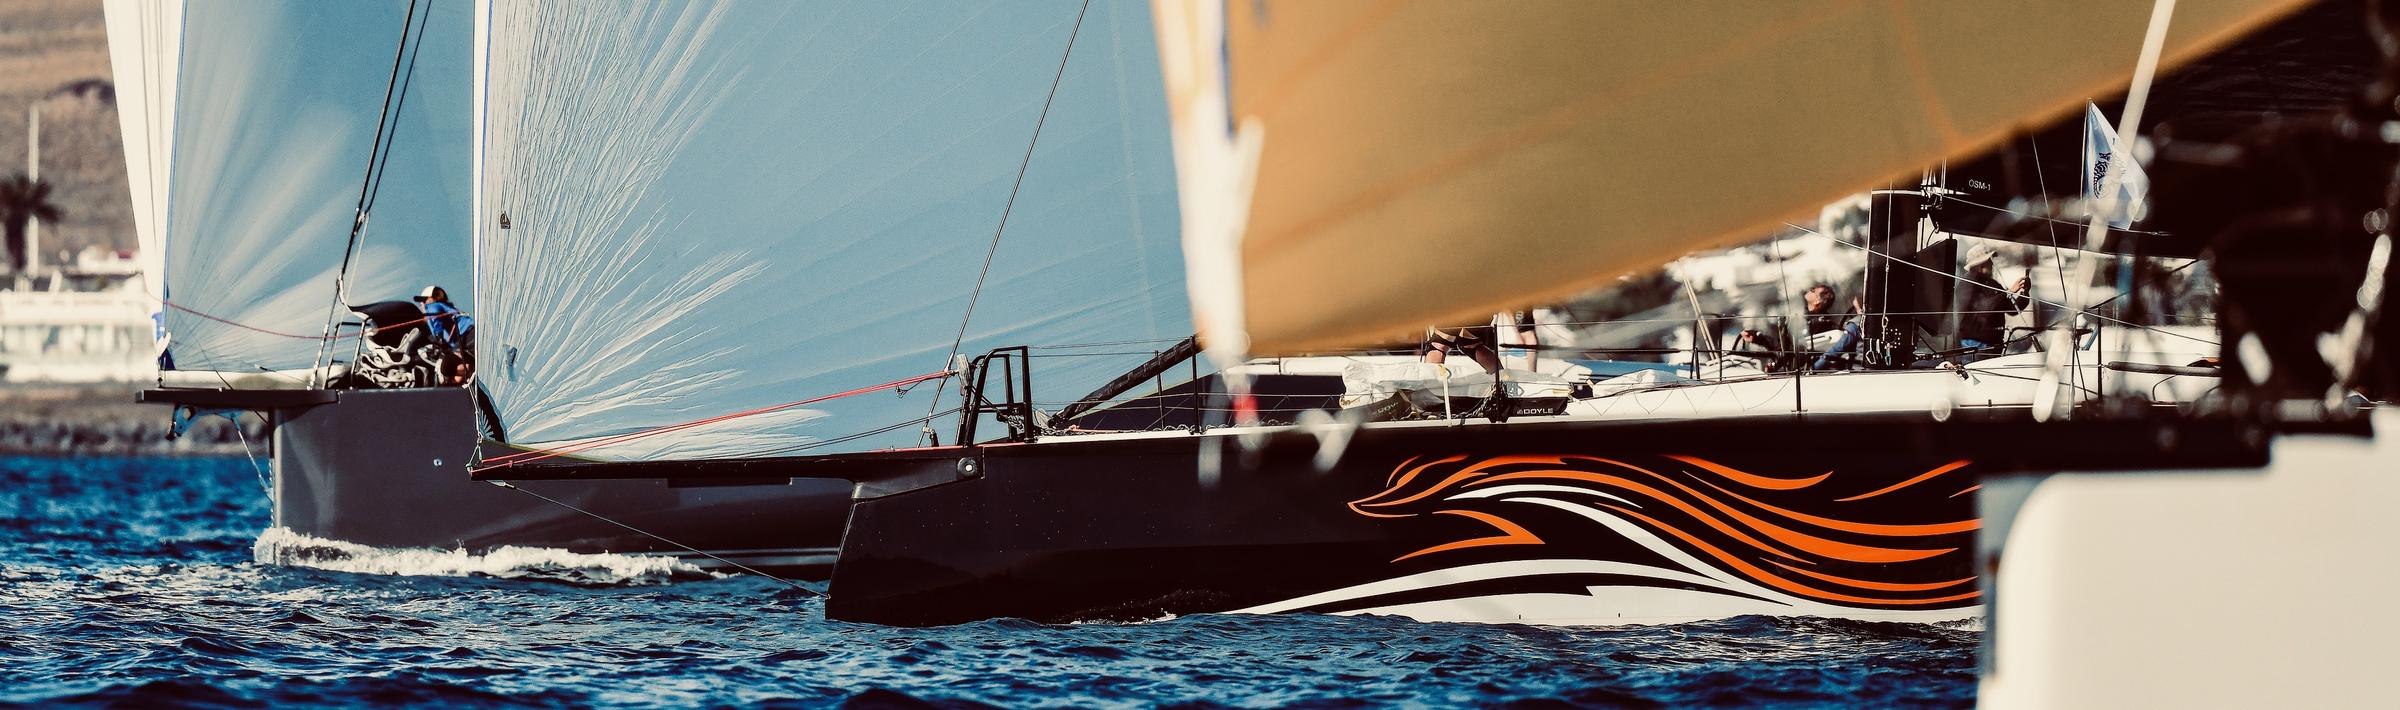 The Royal Ocean Racing Club (RORC) has published the 2025 Admiral’s Cup Notice of Race, setting out the conditions under which the prestigious regatta will be run. Expressions of interest have been received from 14 different countries, with multiple teams from several nations. © James Tomlinson